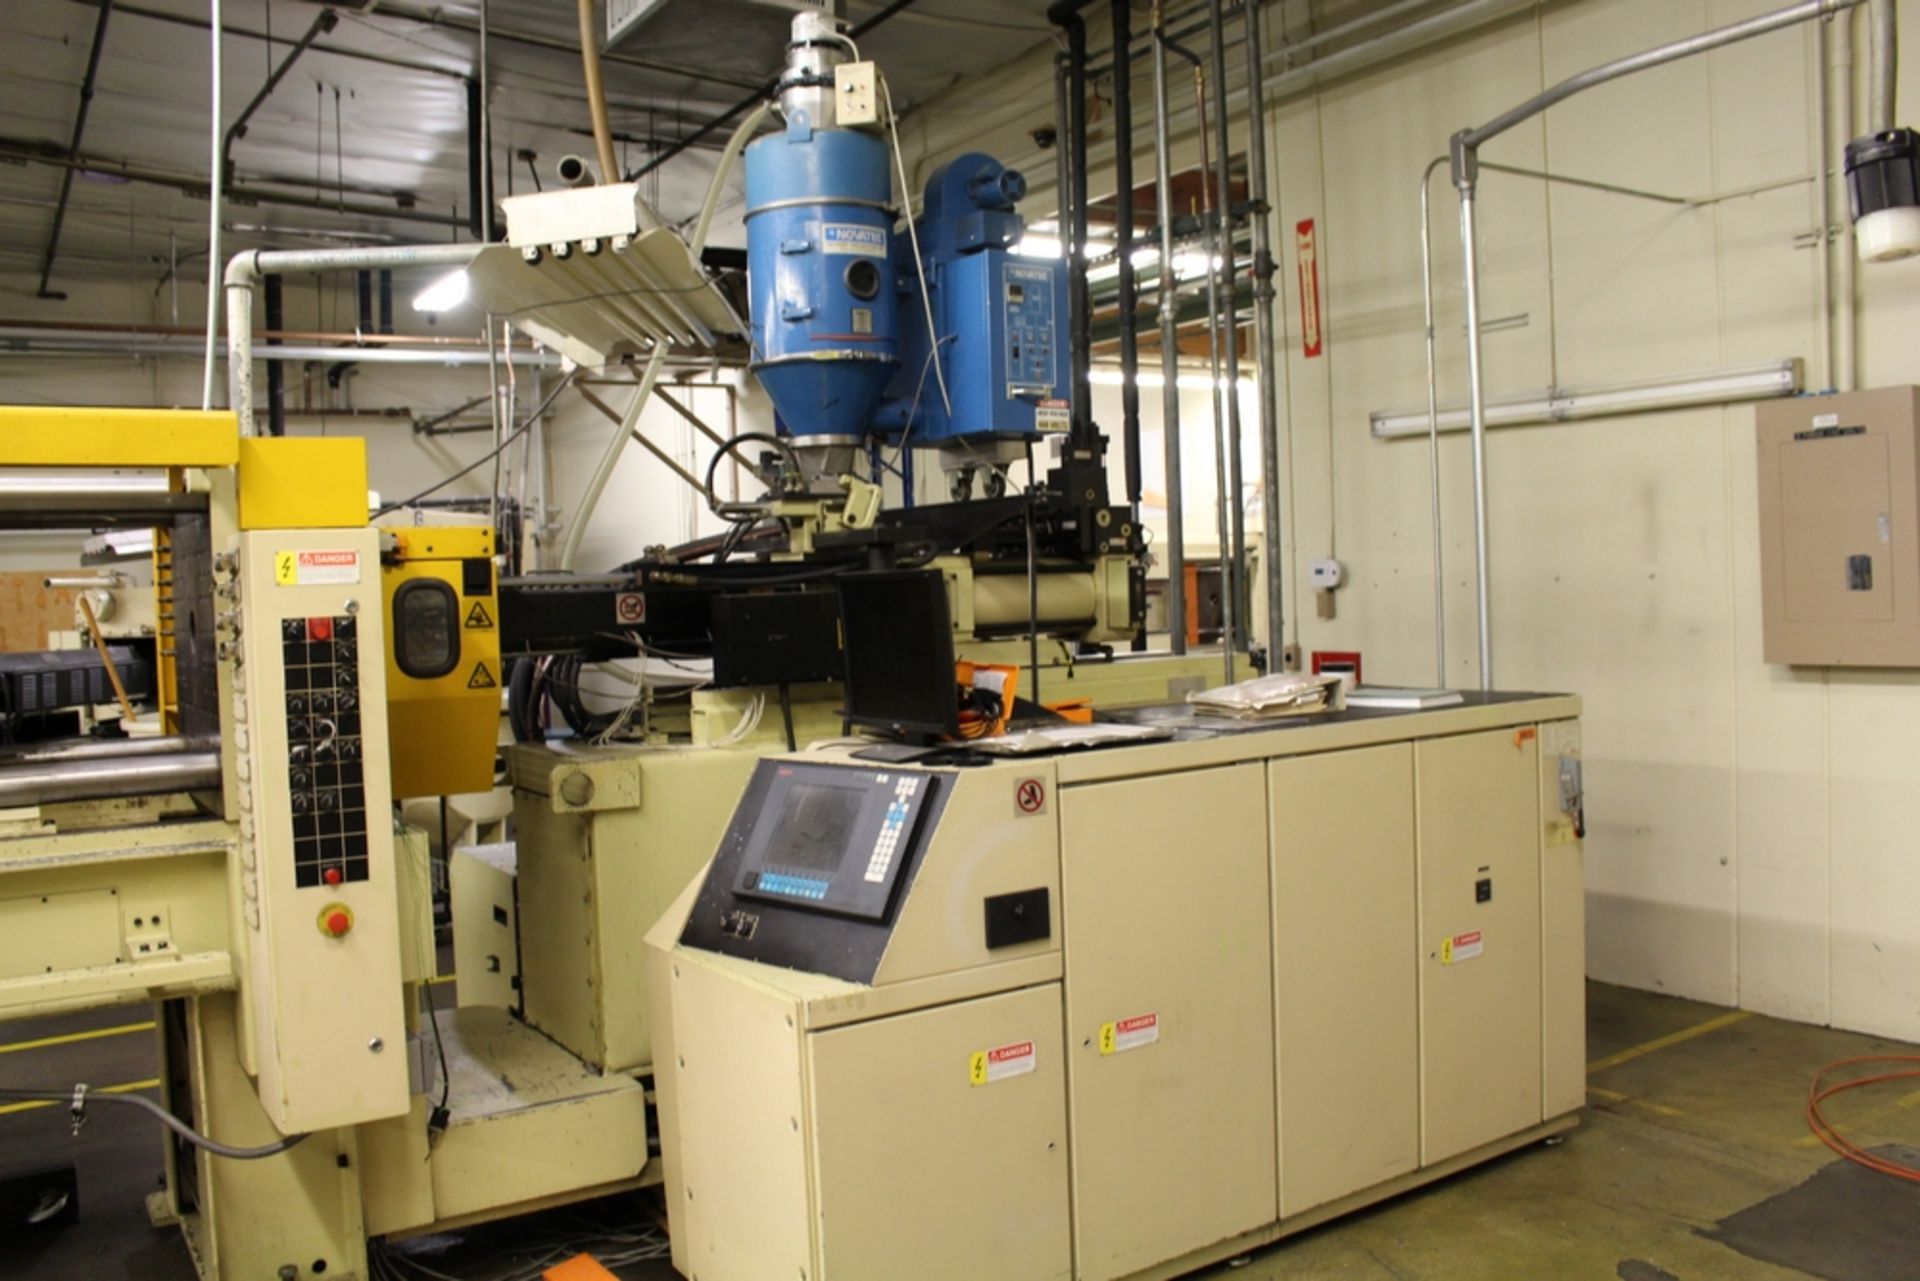 1995 HUSKY 225-TON INJECTION MOLDING MACHINE, MODEL CX160 RS42/42, S/N 11831, 31.5" X 31.5" PLATENS, - Image 3 of 8